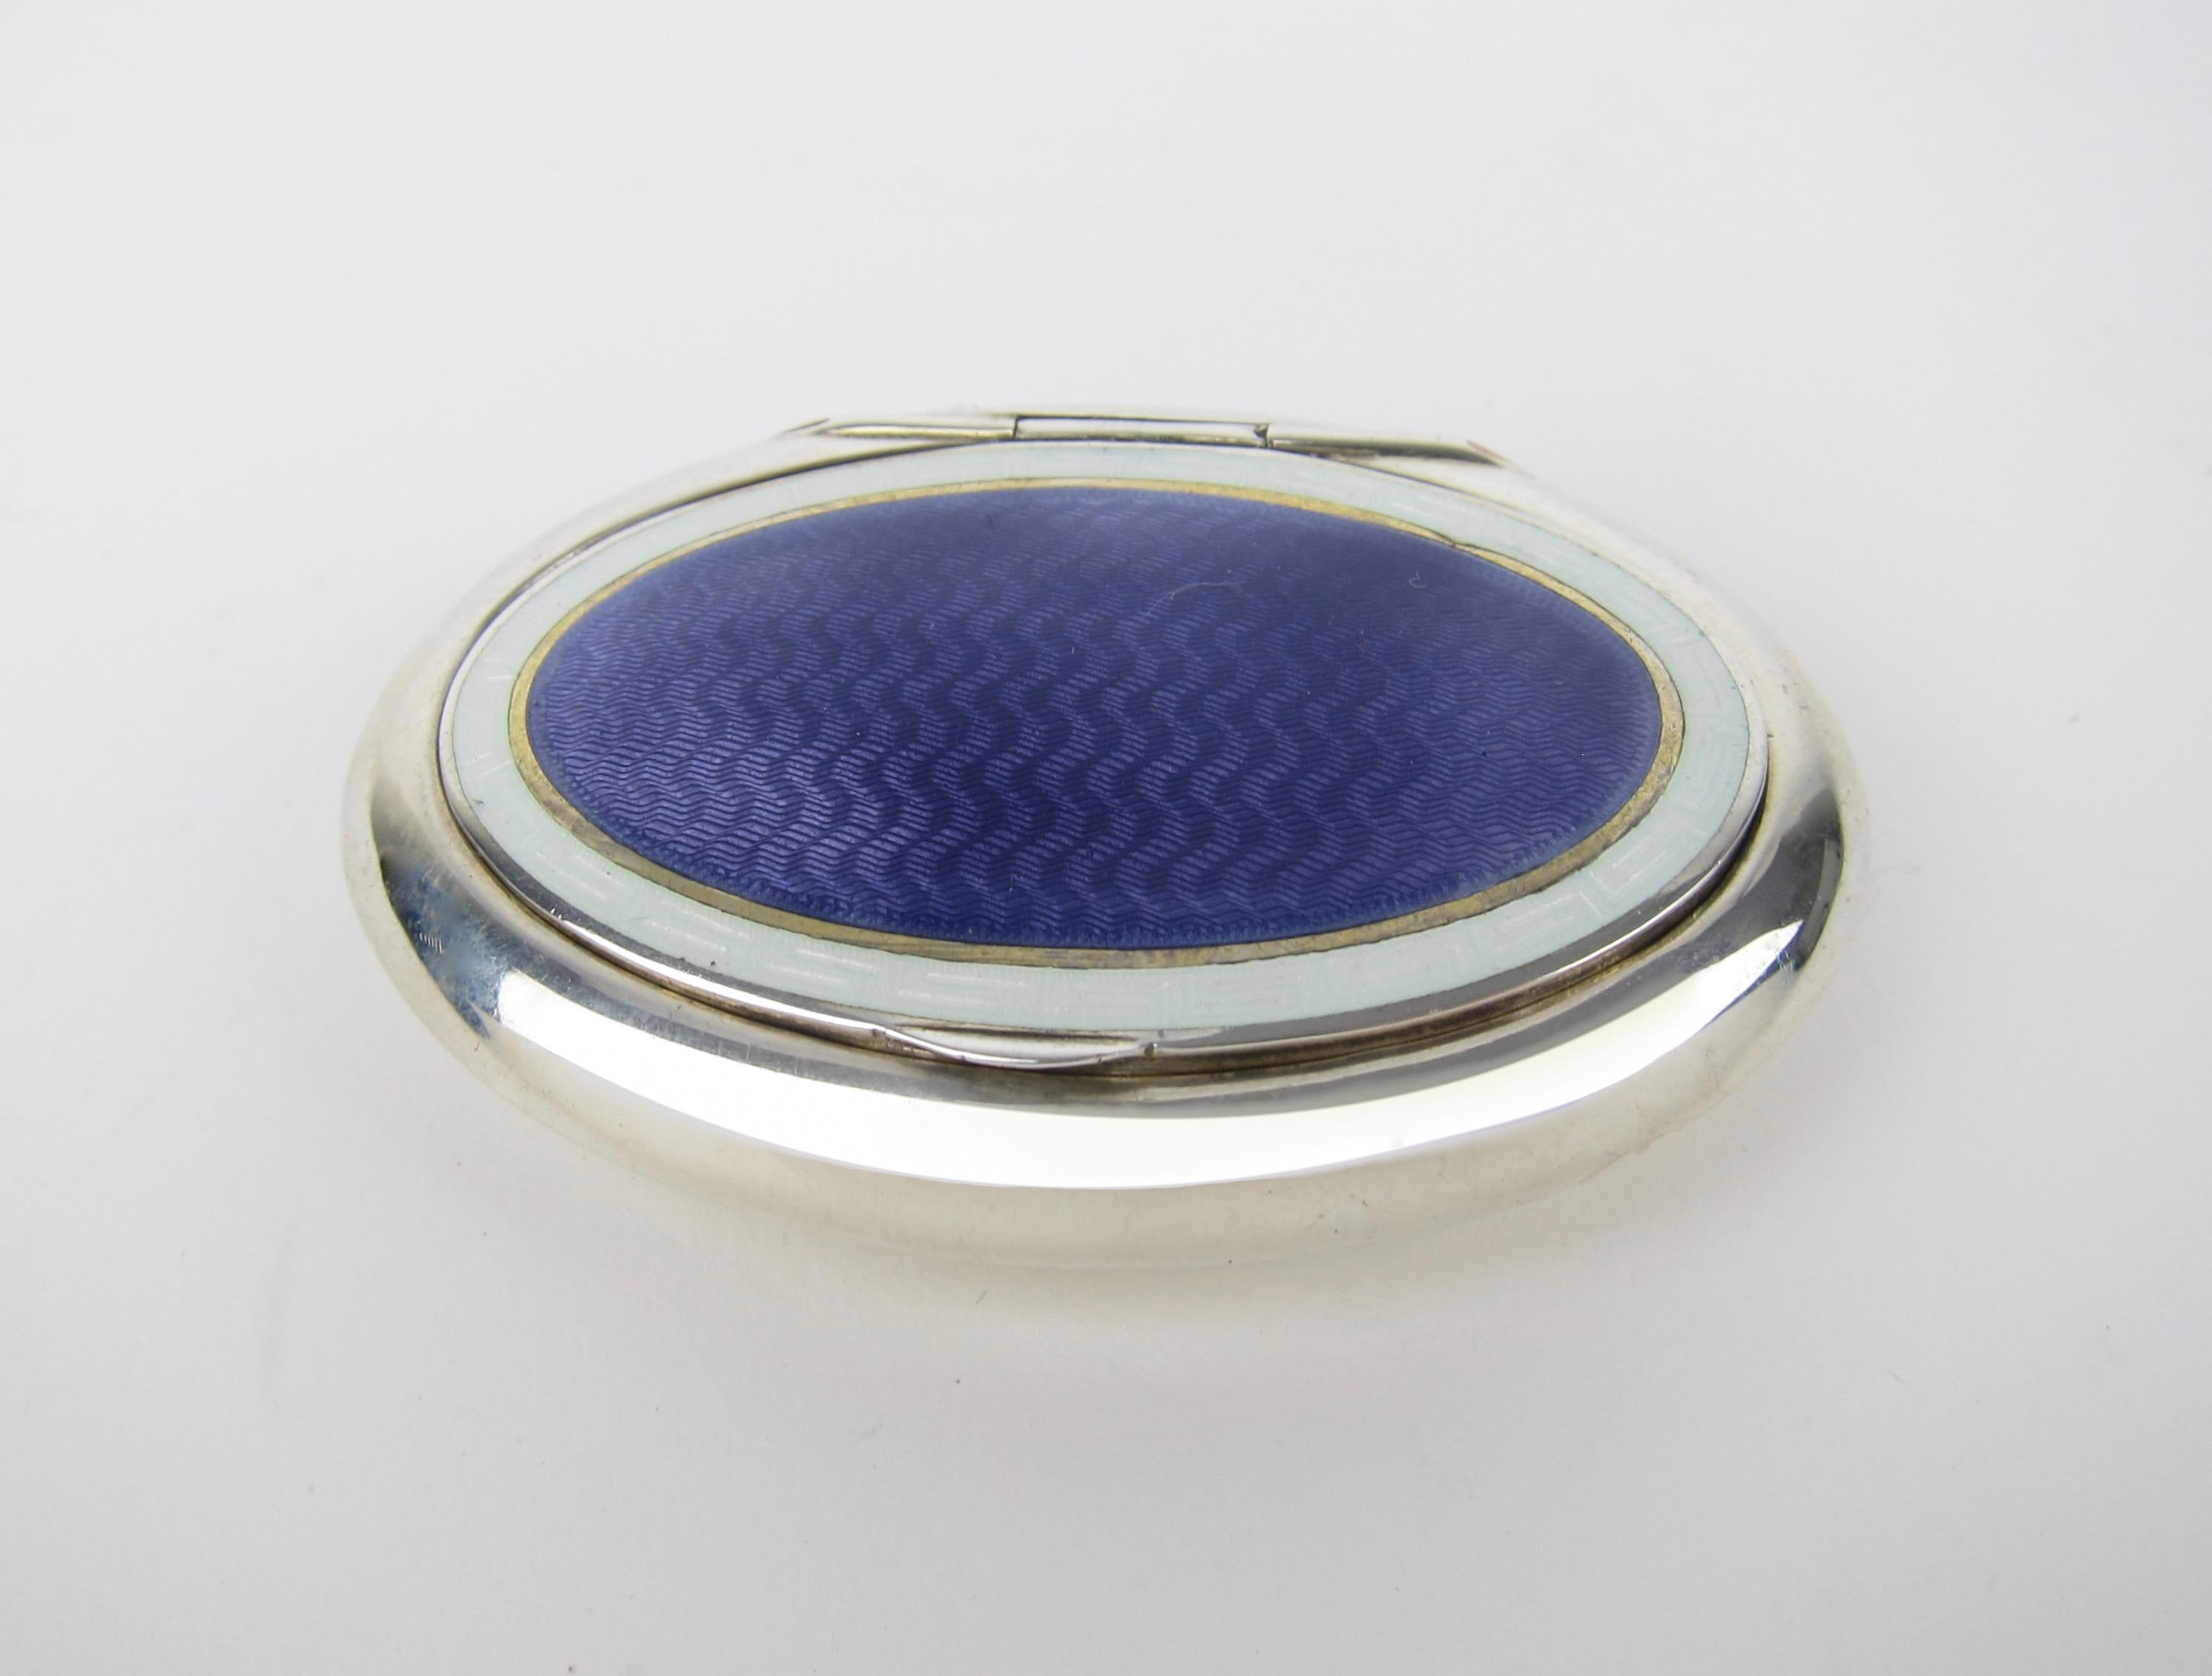 An antique English sterling silver and enamel box of oval cushion form with a hinged lid and gilt interior by Charles Edwin Turner of Birmingham, date marked for 1910. The Guilloche enameled lid is a field of rich purple over an engine-turned